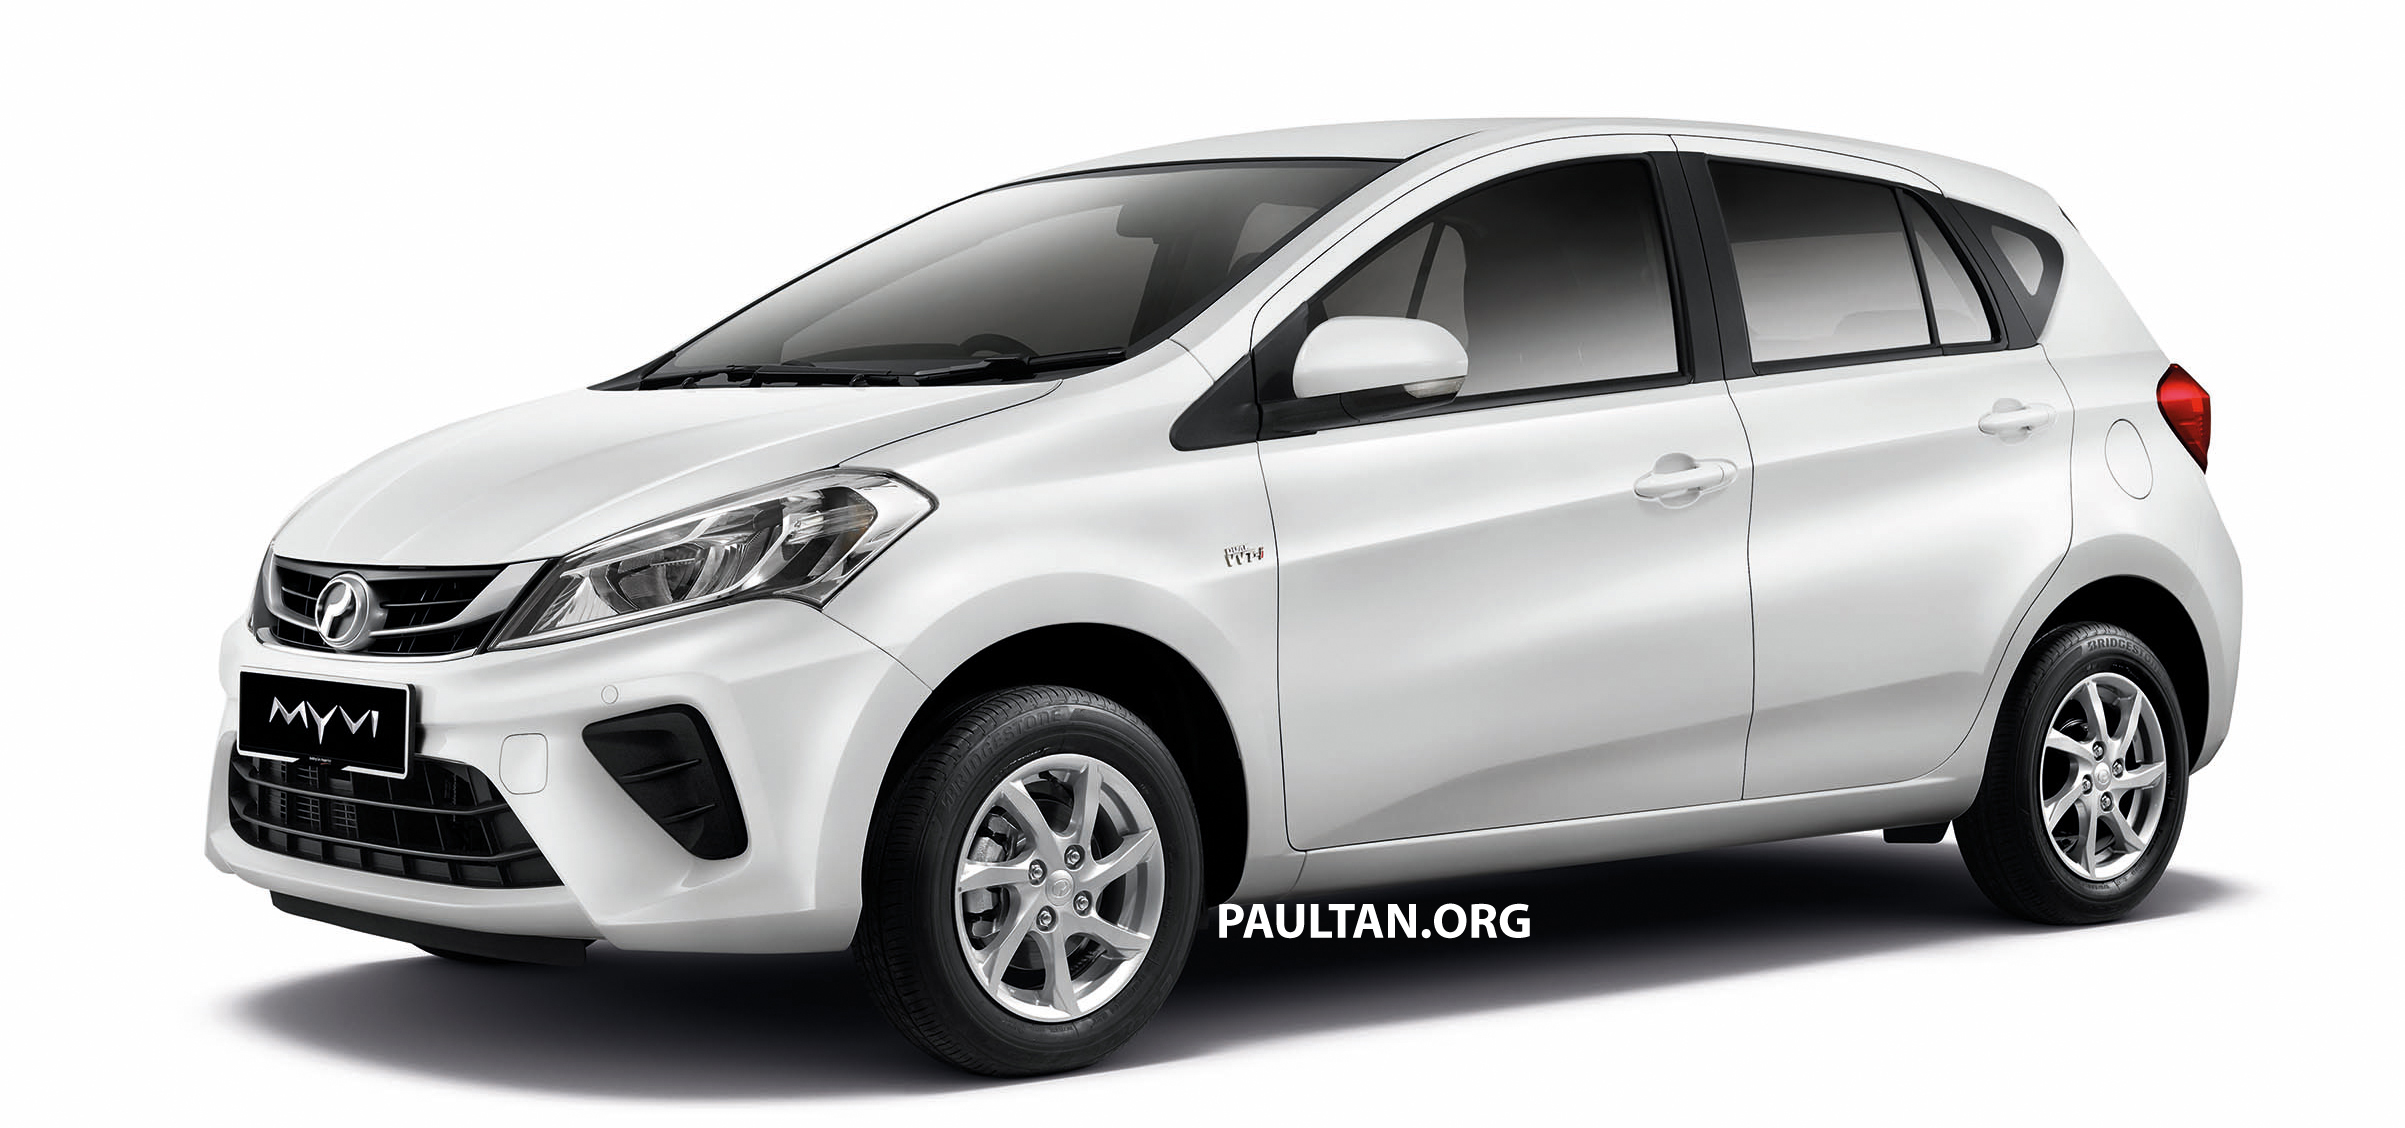 2018 Perodua Myvi officially launched in Malaysia – now with full